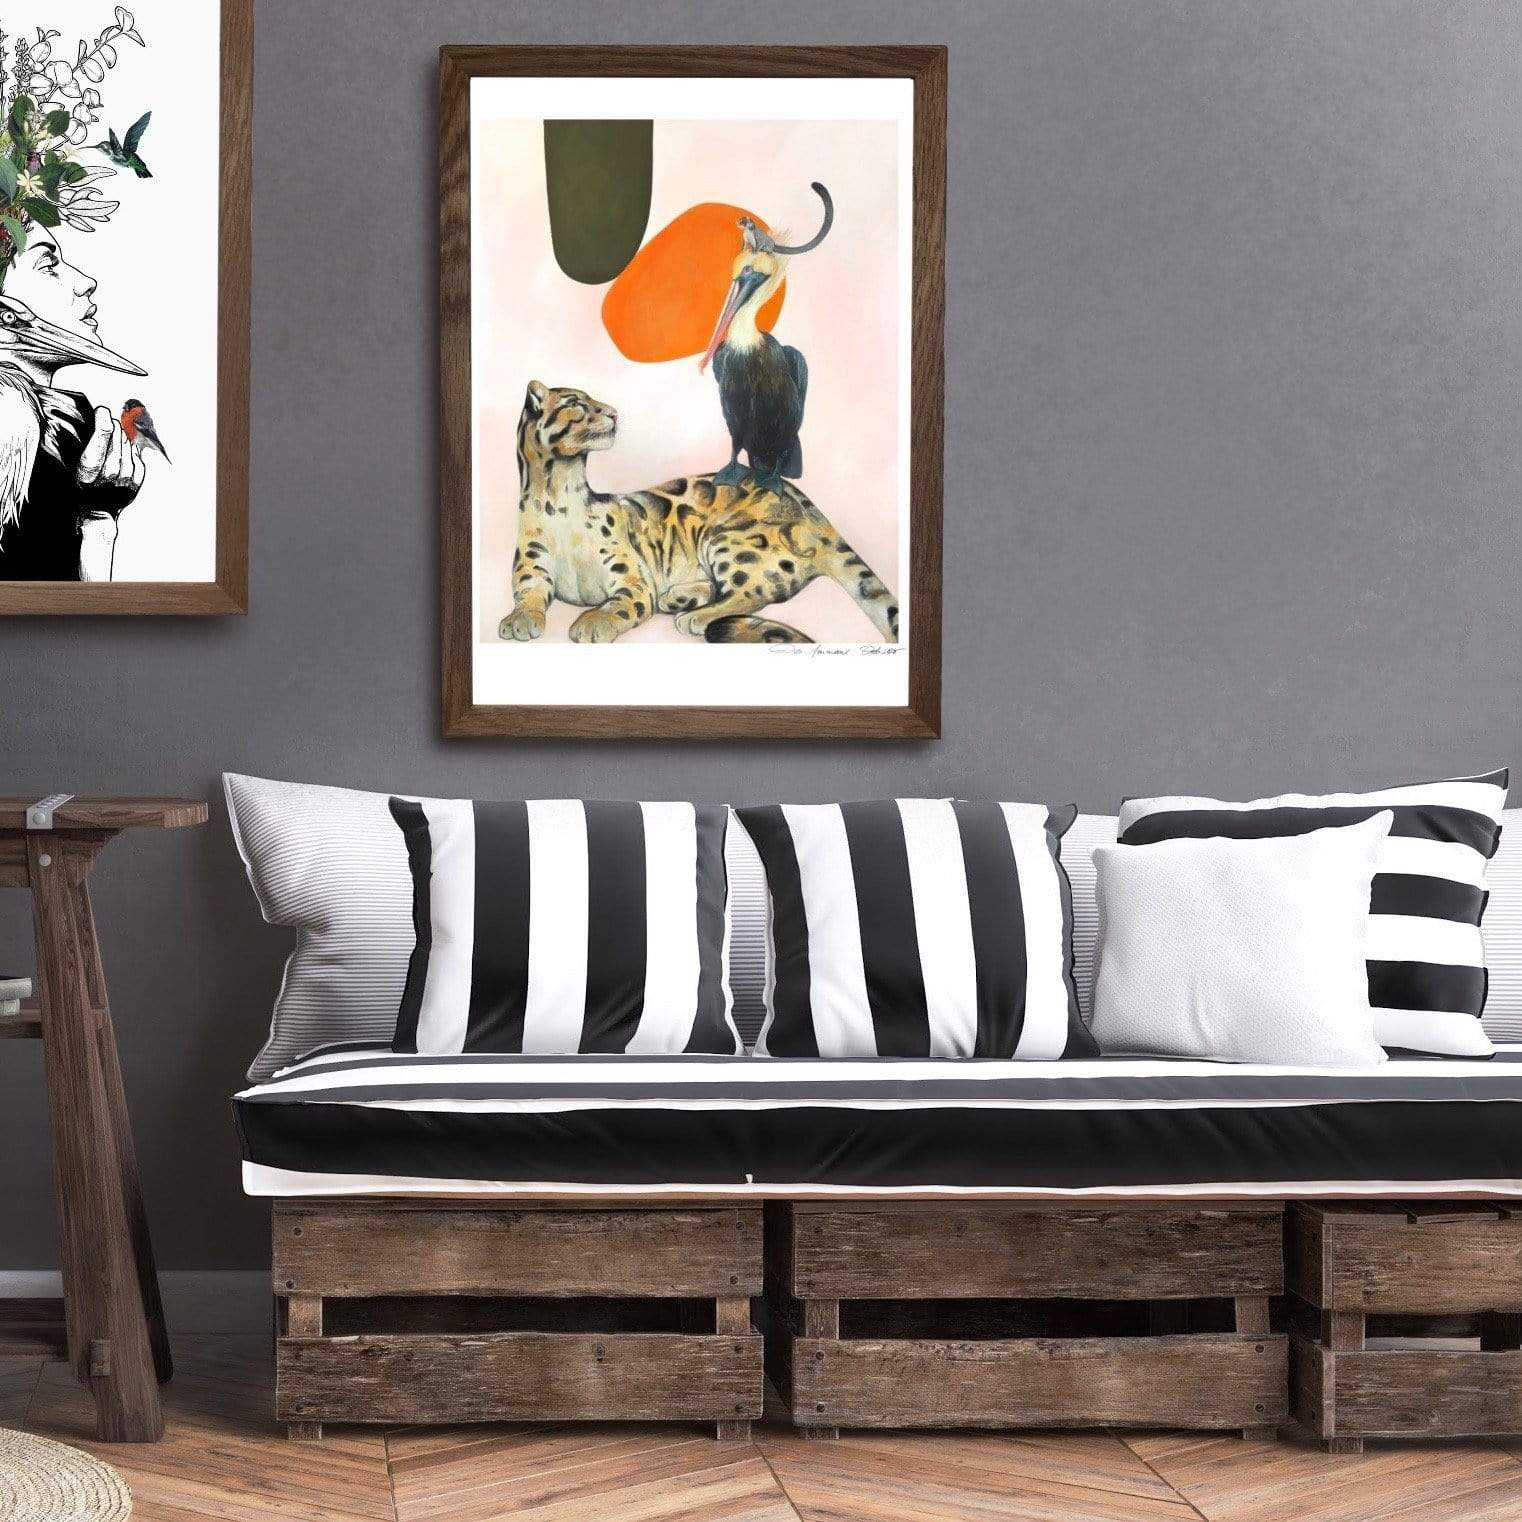 A living room featuring the artwork of Des Animaux